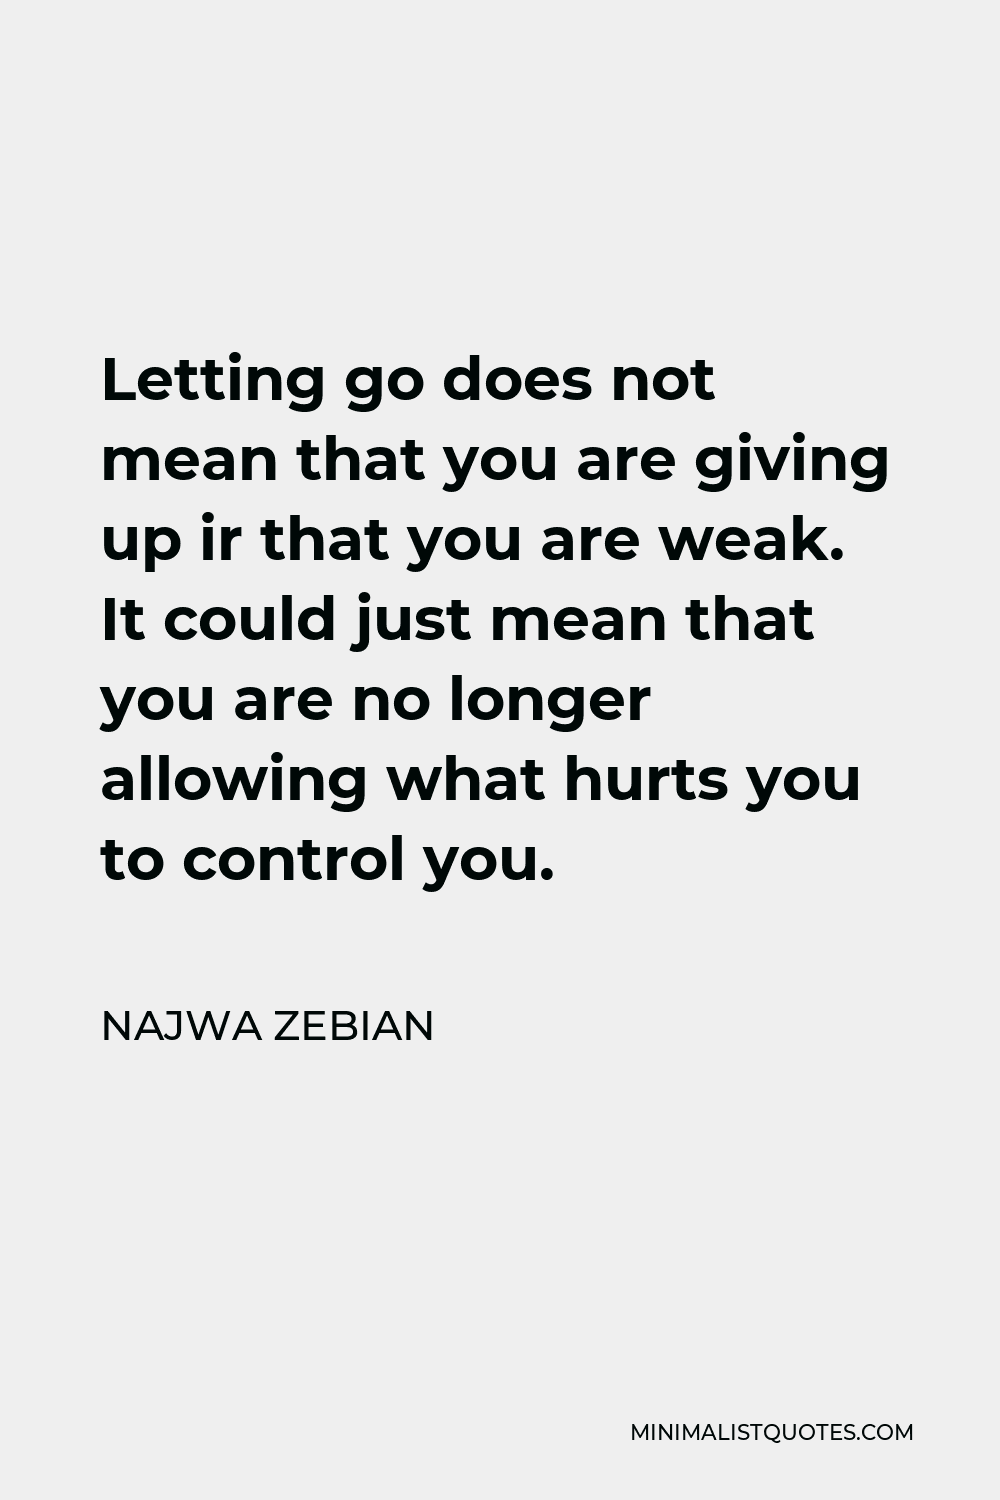 Najwa Zebian Quote - Letting go does not mean that you are giving up or that you are weak. It could just mean that you are no longer allowing what hurts you to control you.